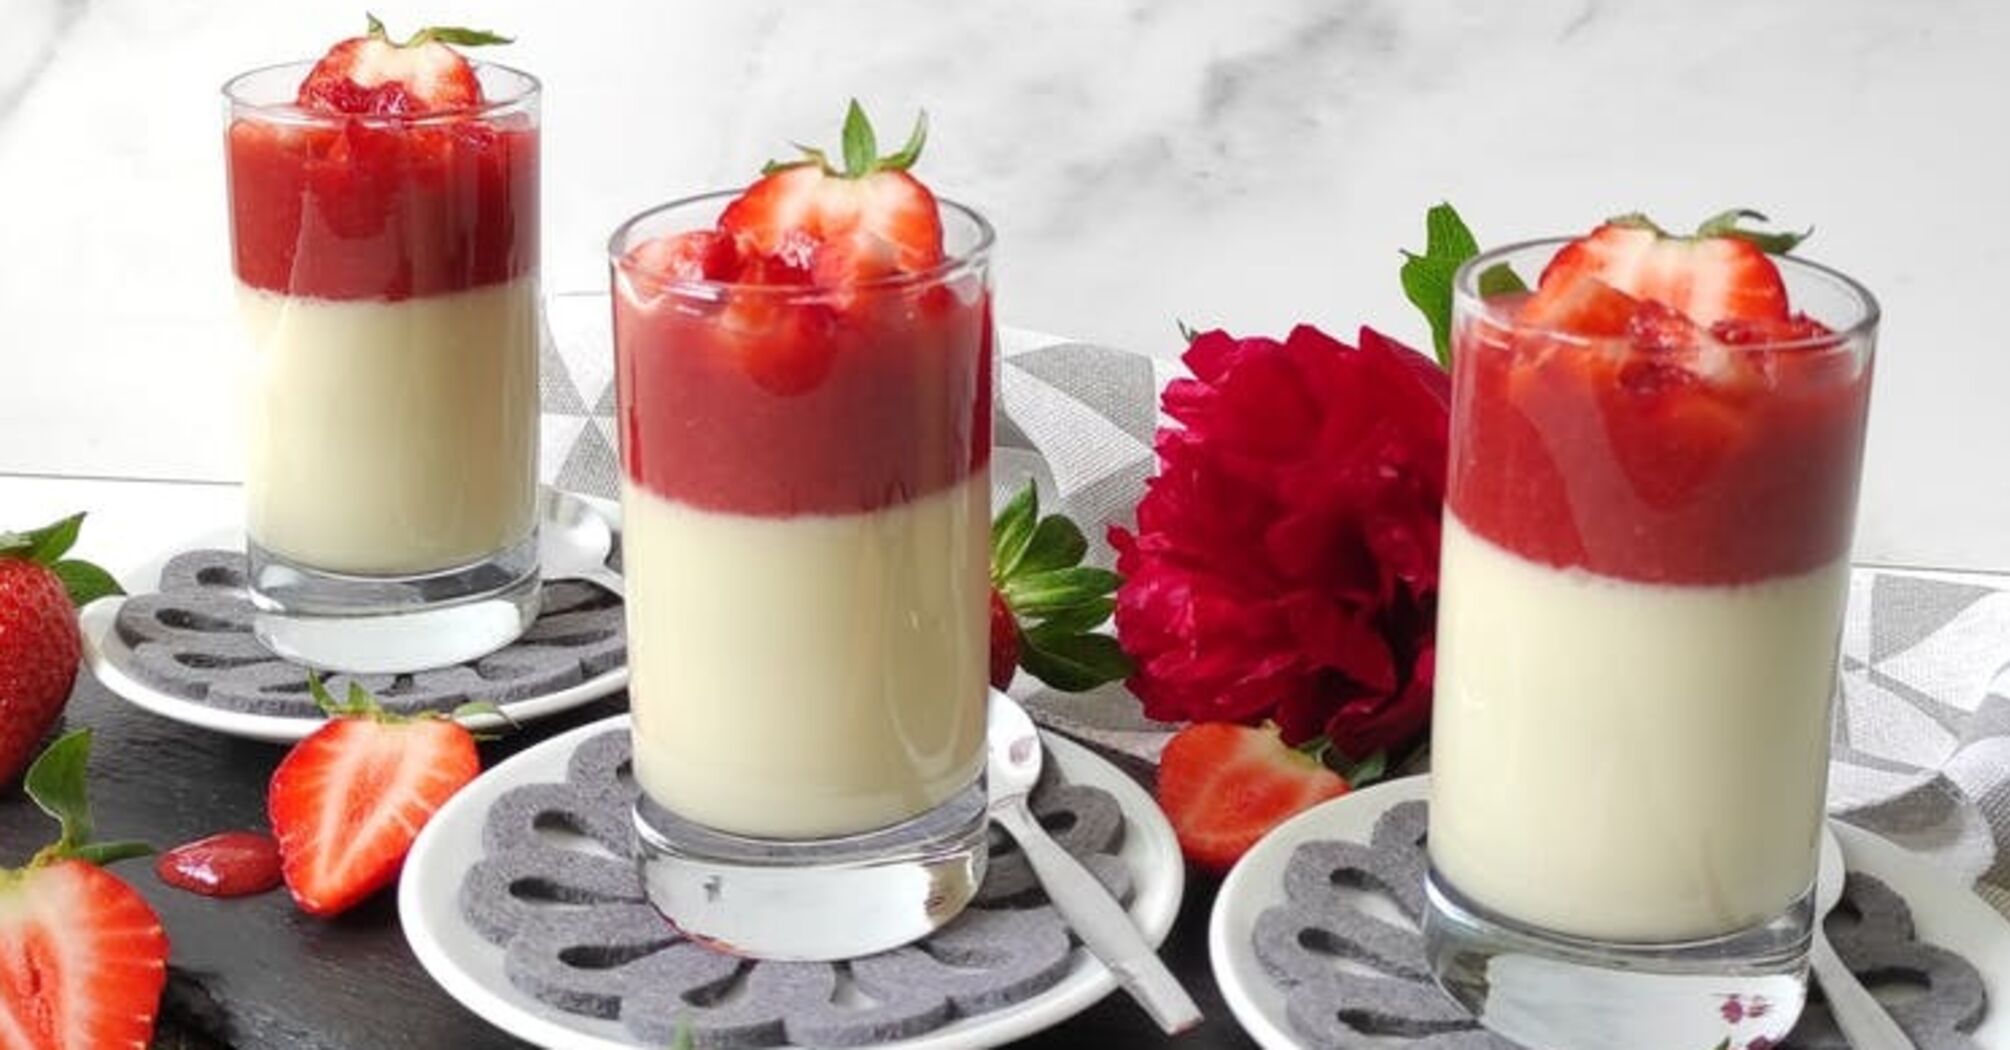 Elementary strawberry dessert in a glass: you need 5 ingredients only 